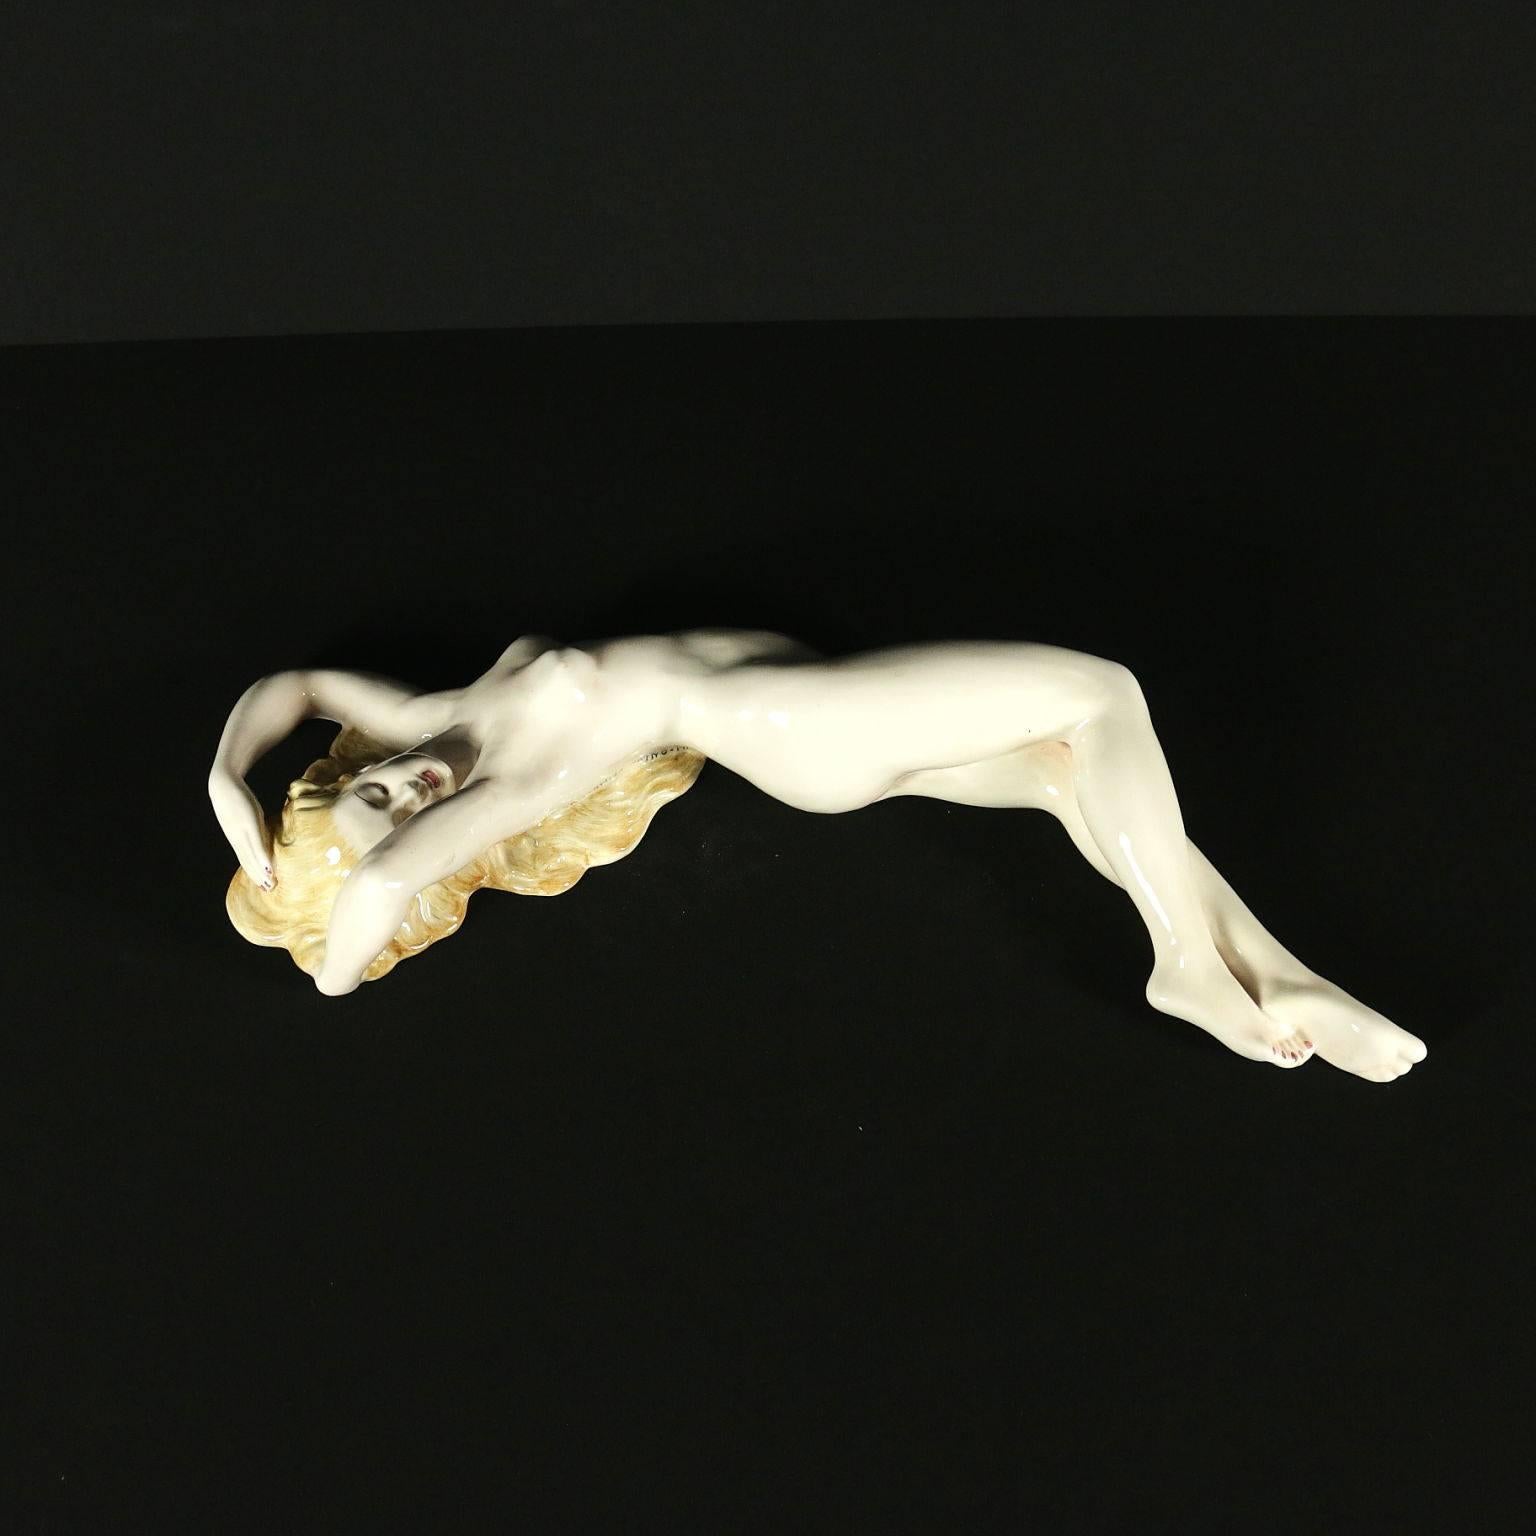 Enamelled ceramic sculpture depicting a female naked. Manufacturing brand on the back in the bottom.